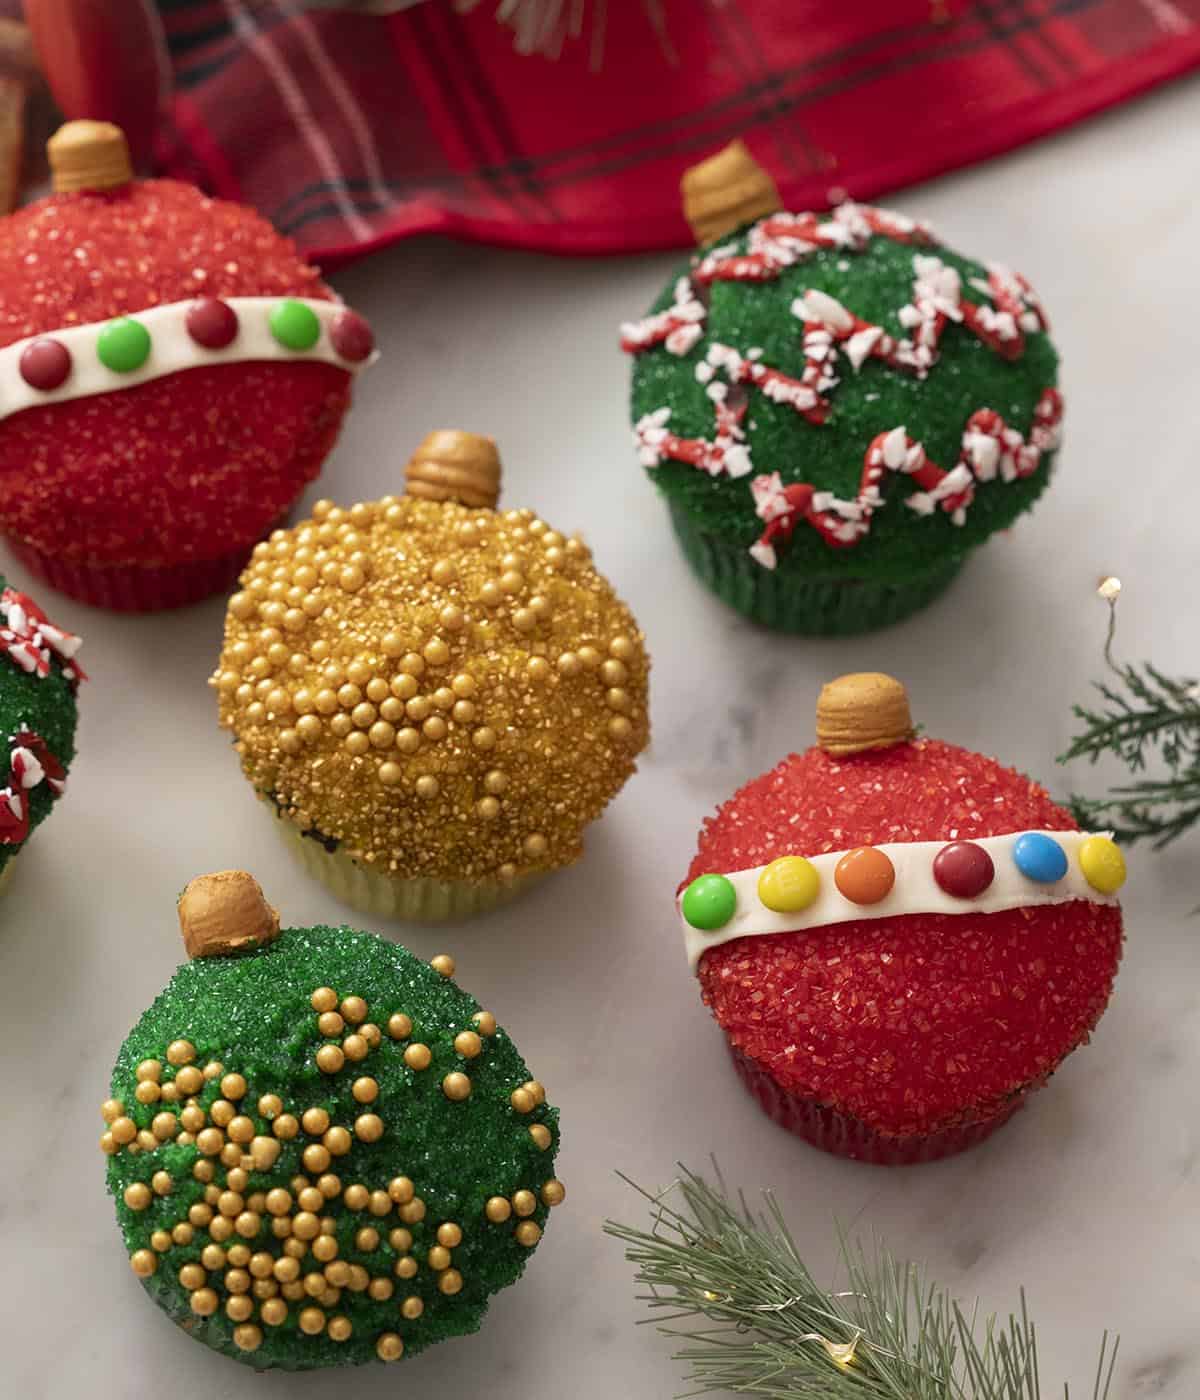 Christmas ornament cupcakes decorated with colorful sanding sugar and candies on a marble counter.